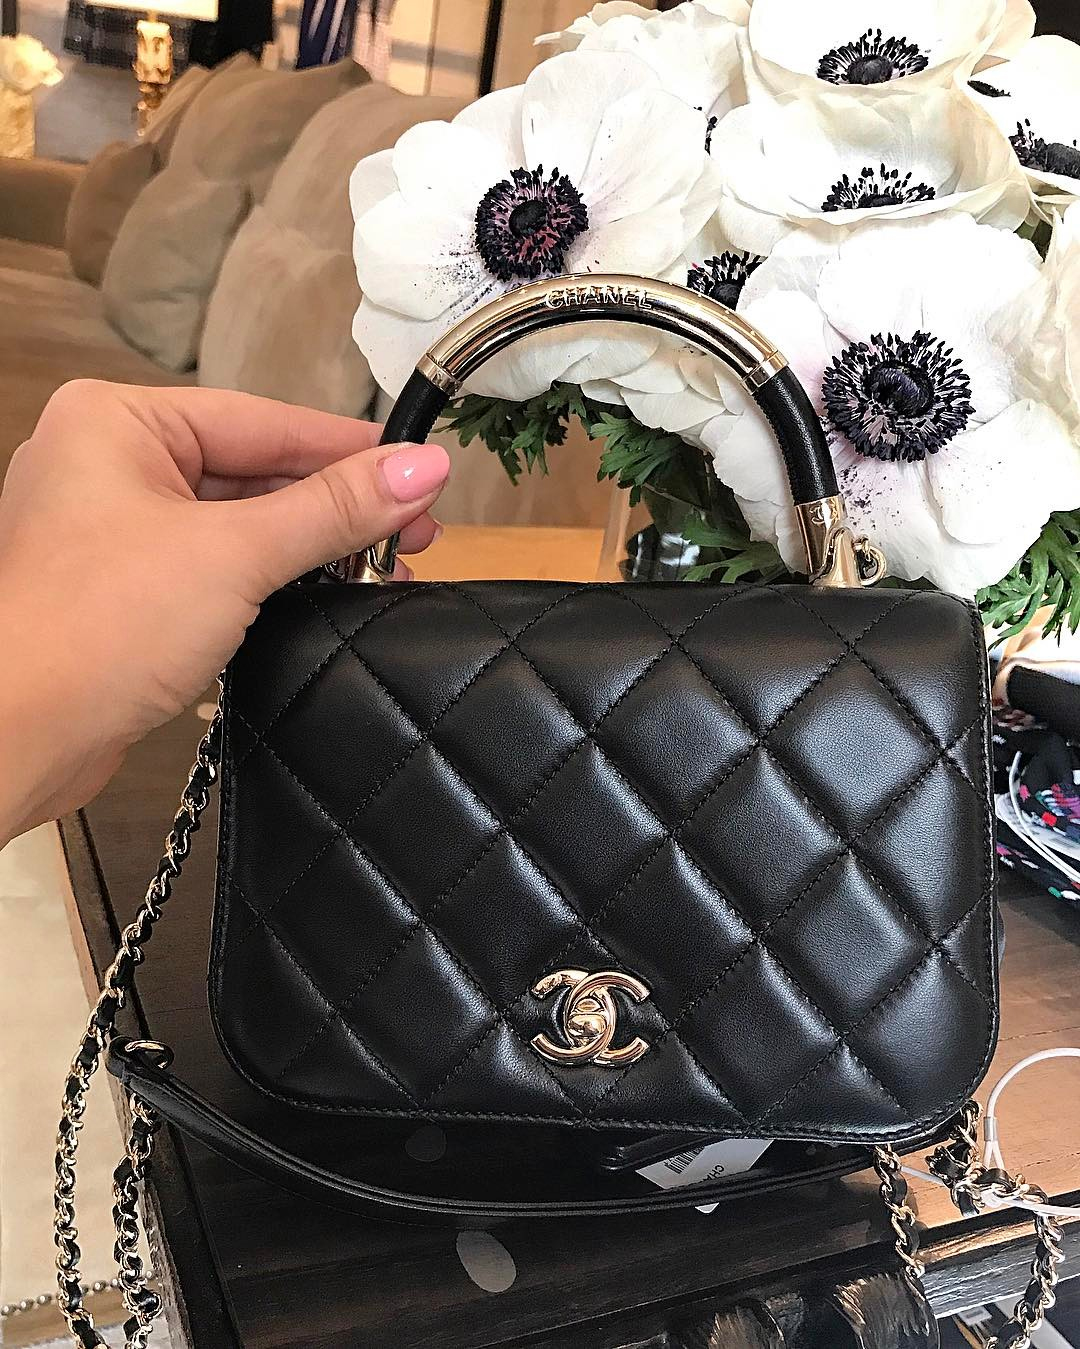 Chanel Carry Chic Bag Collection - Blog for Best Designer Bags Review